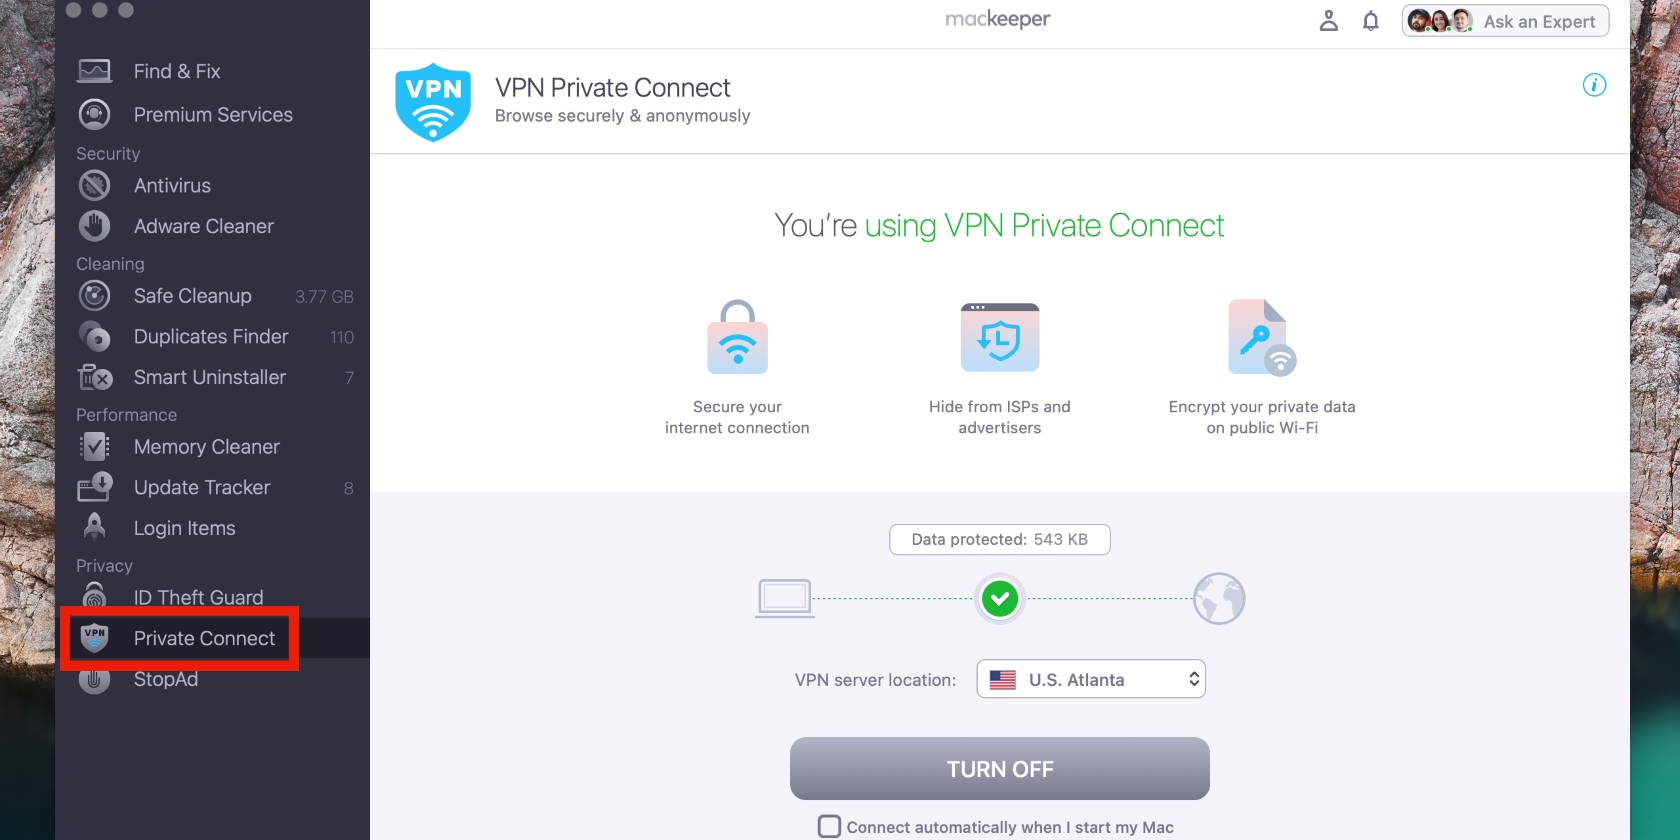 VPN Private Connect is enabled in MacKeeper. The button is grayed out, indicating the VPN is on, and the user is connected to a server in Atlanta, USA.